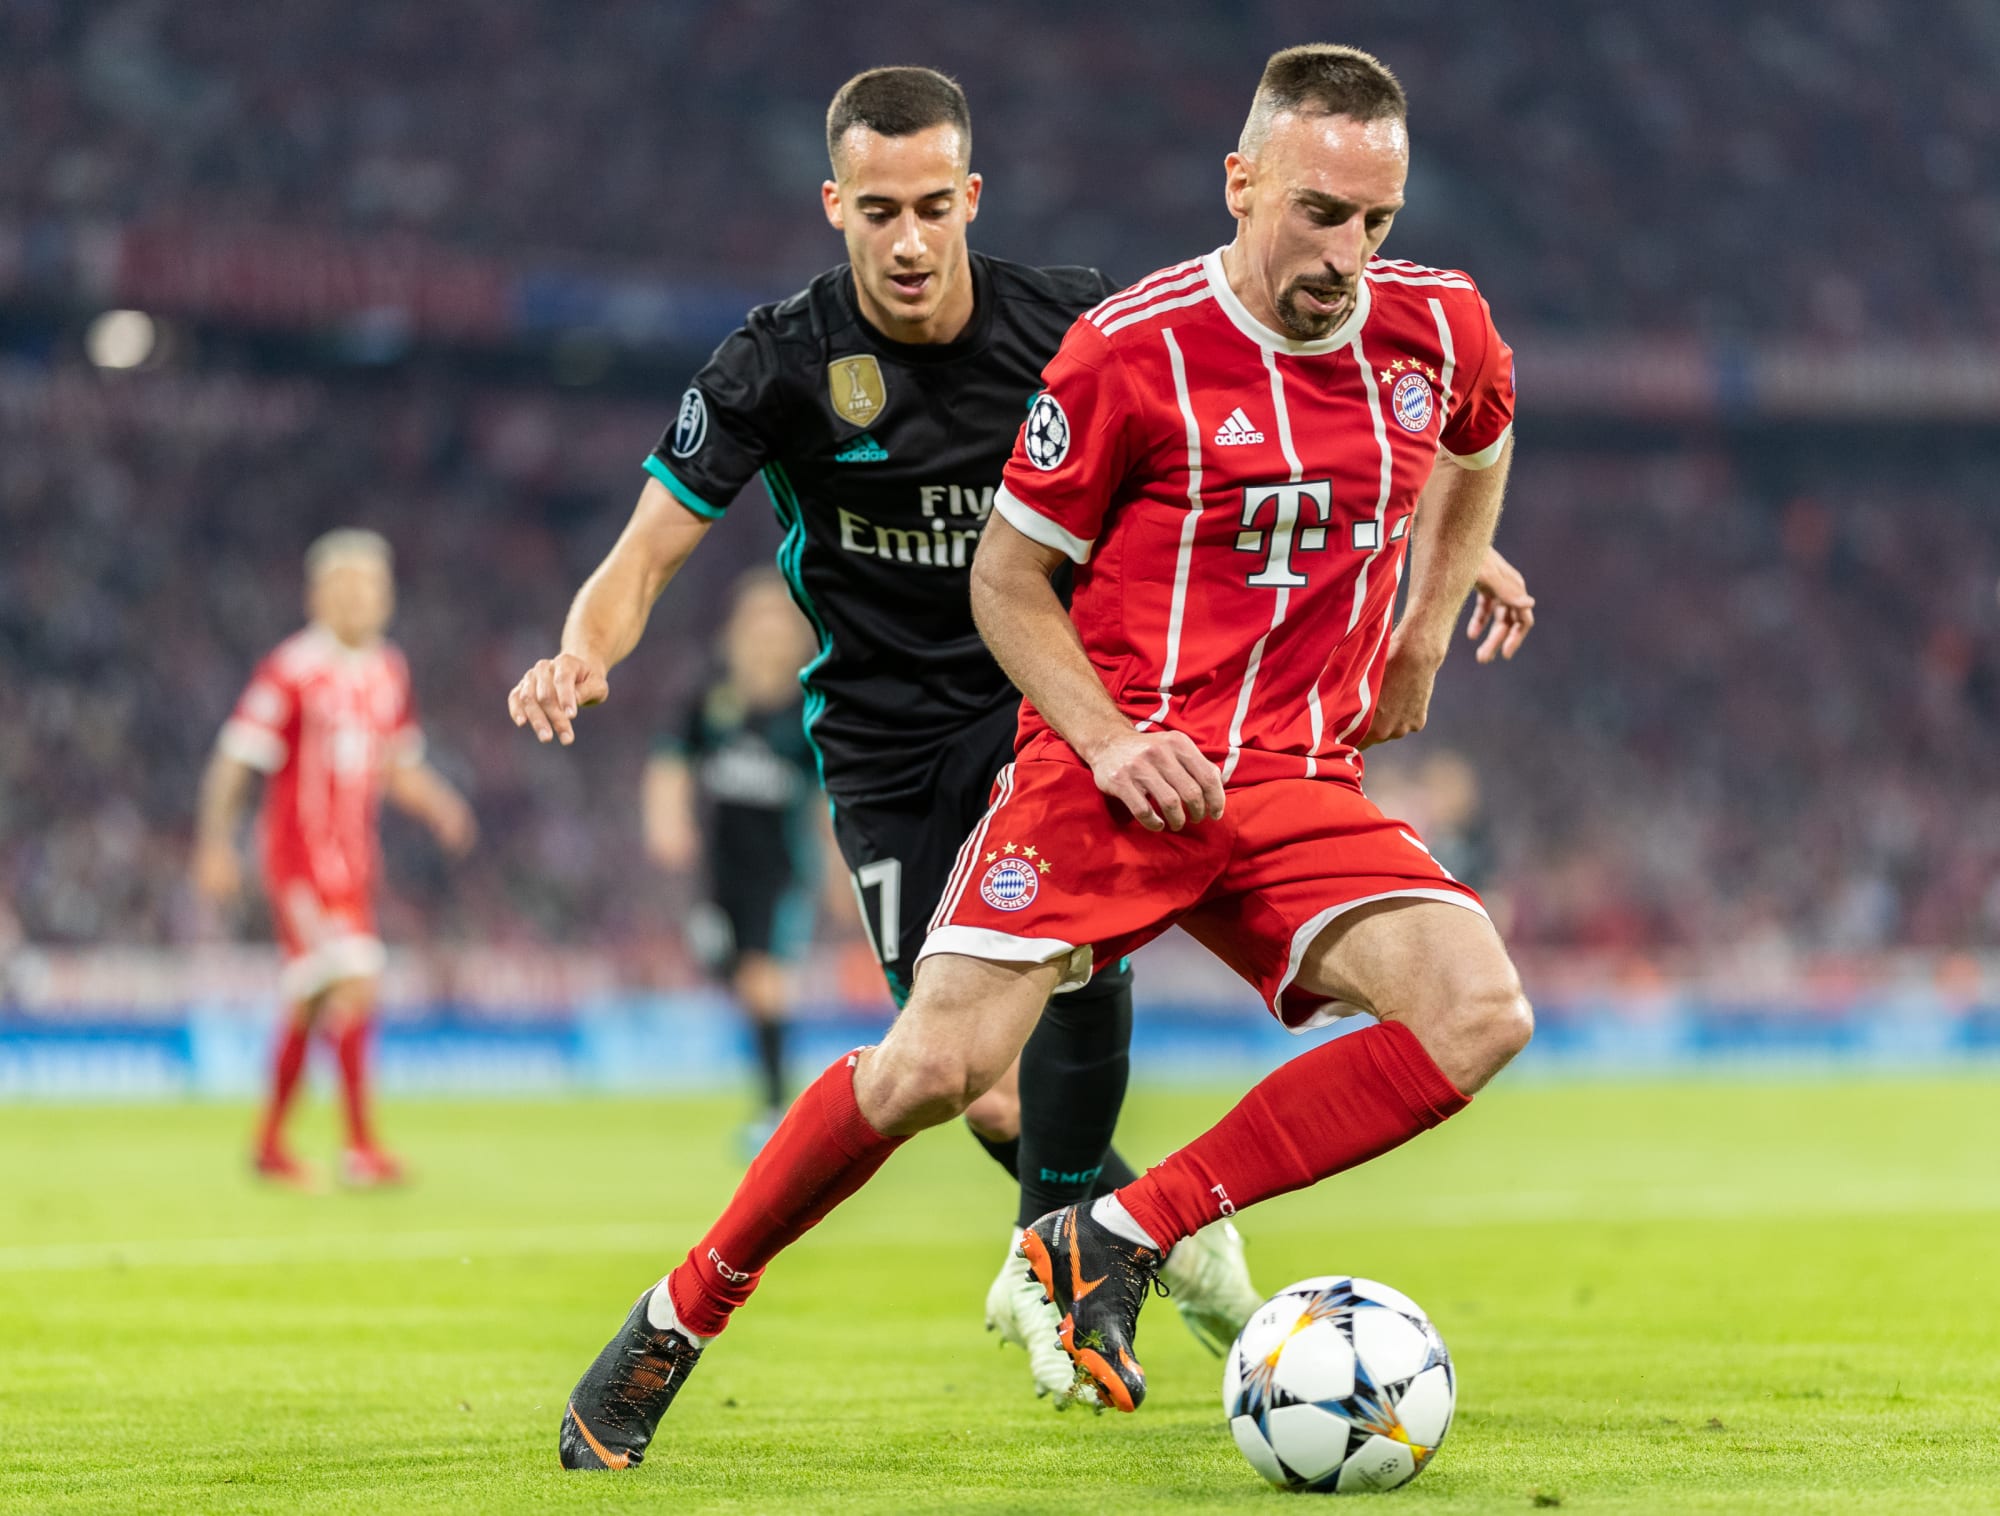 Real Madrid vs. Bayern Munich second leg collective preview